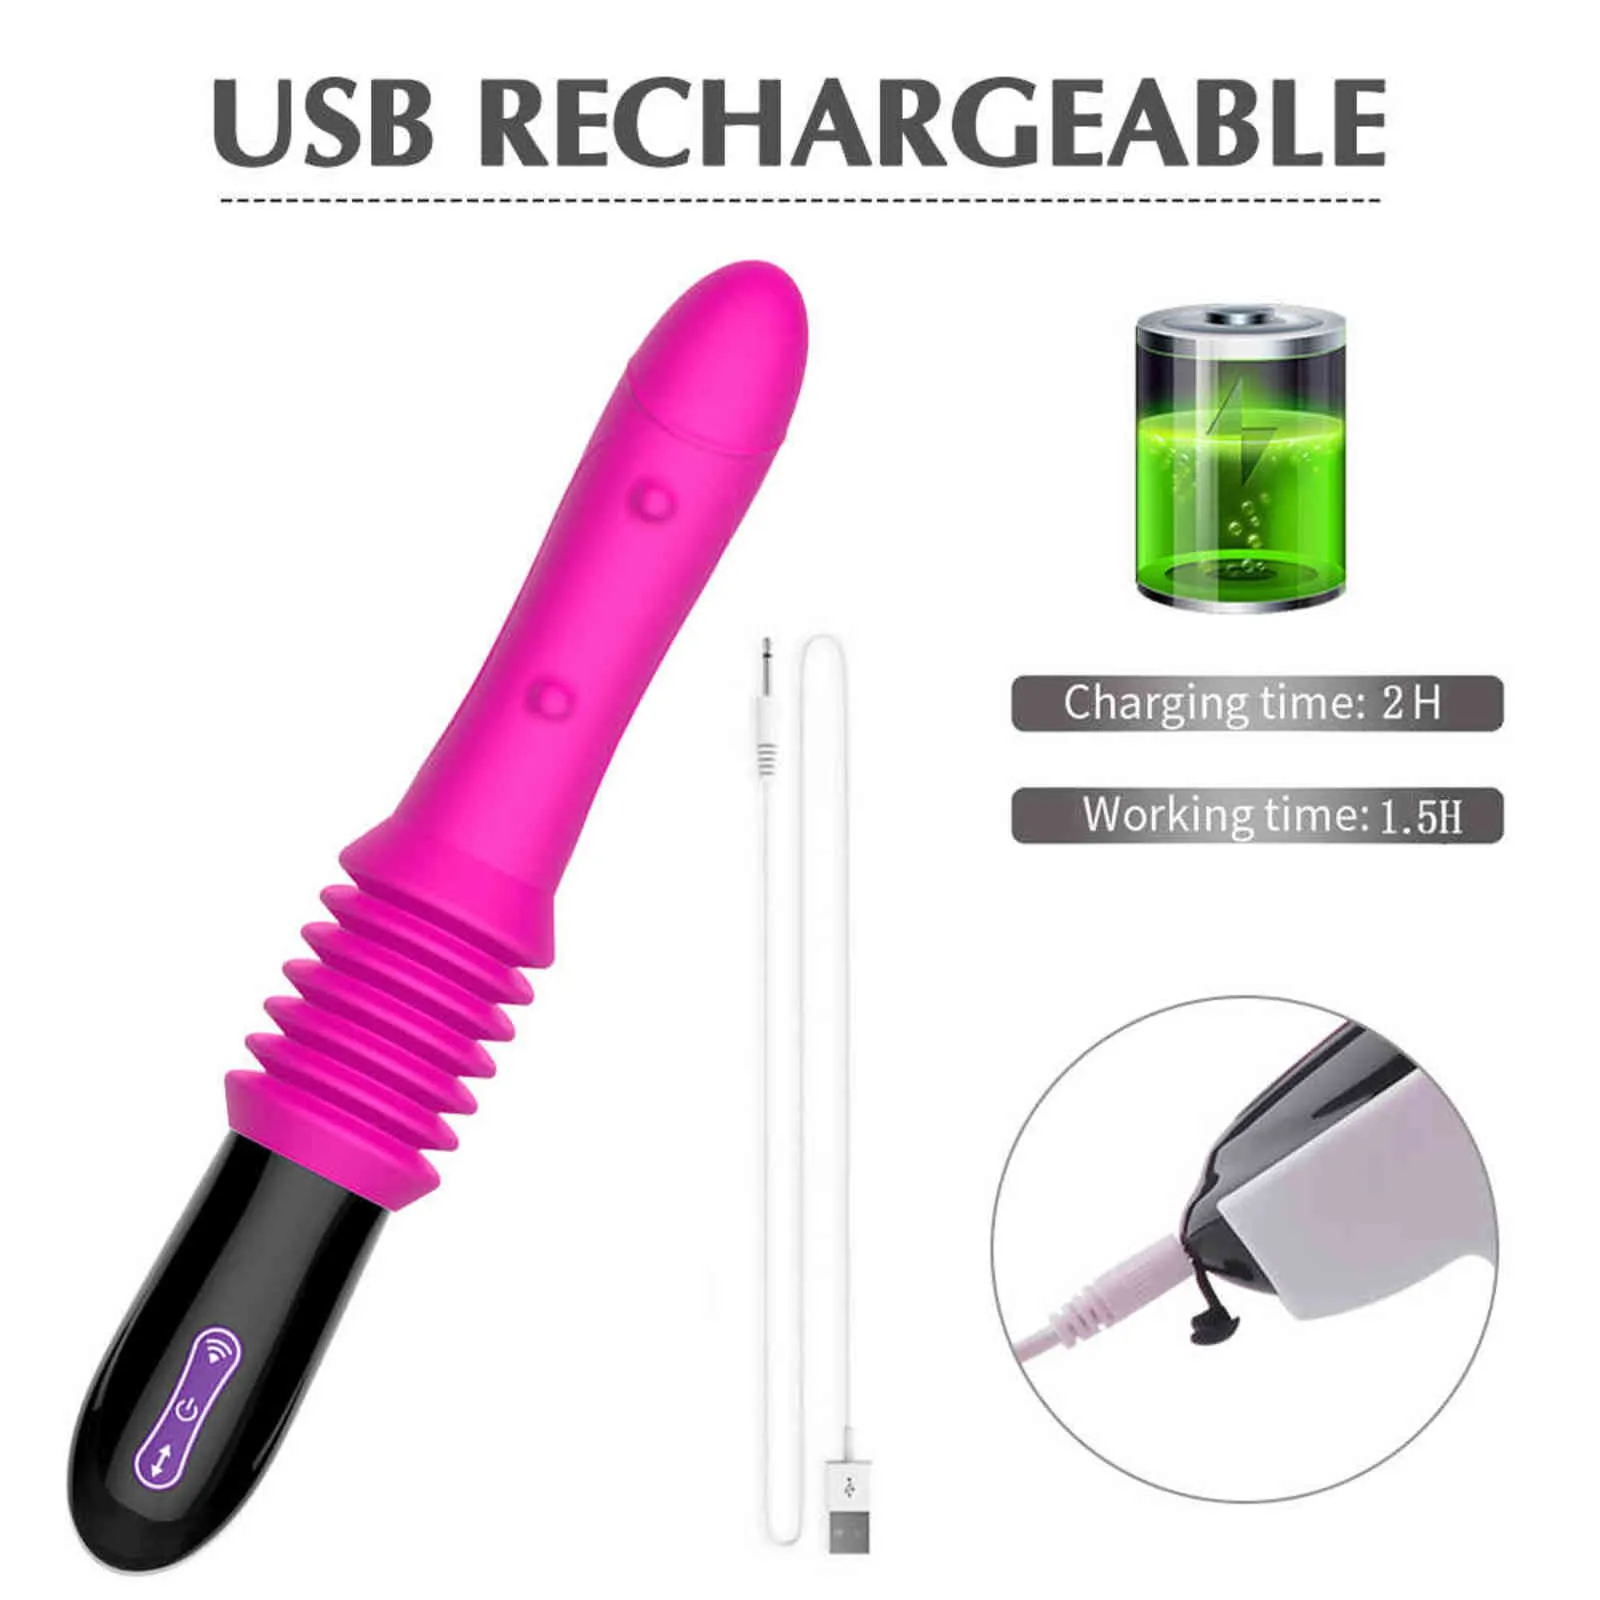 Nxy Vibrators Sex Thrusting Dildo Automatic g Spot Suction Game for Women Fun Anal Massage Orgasm 11097899392